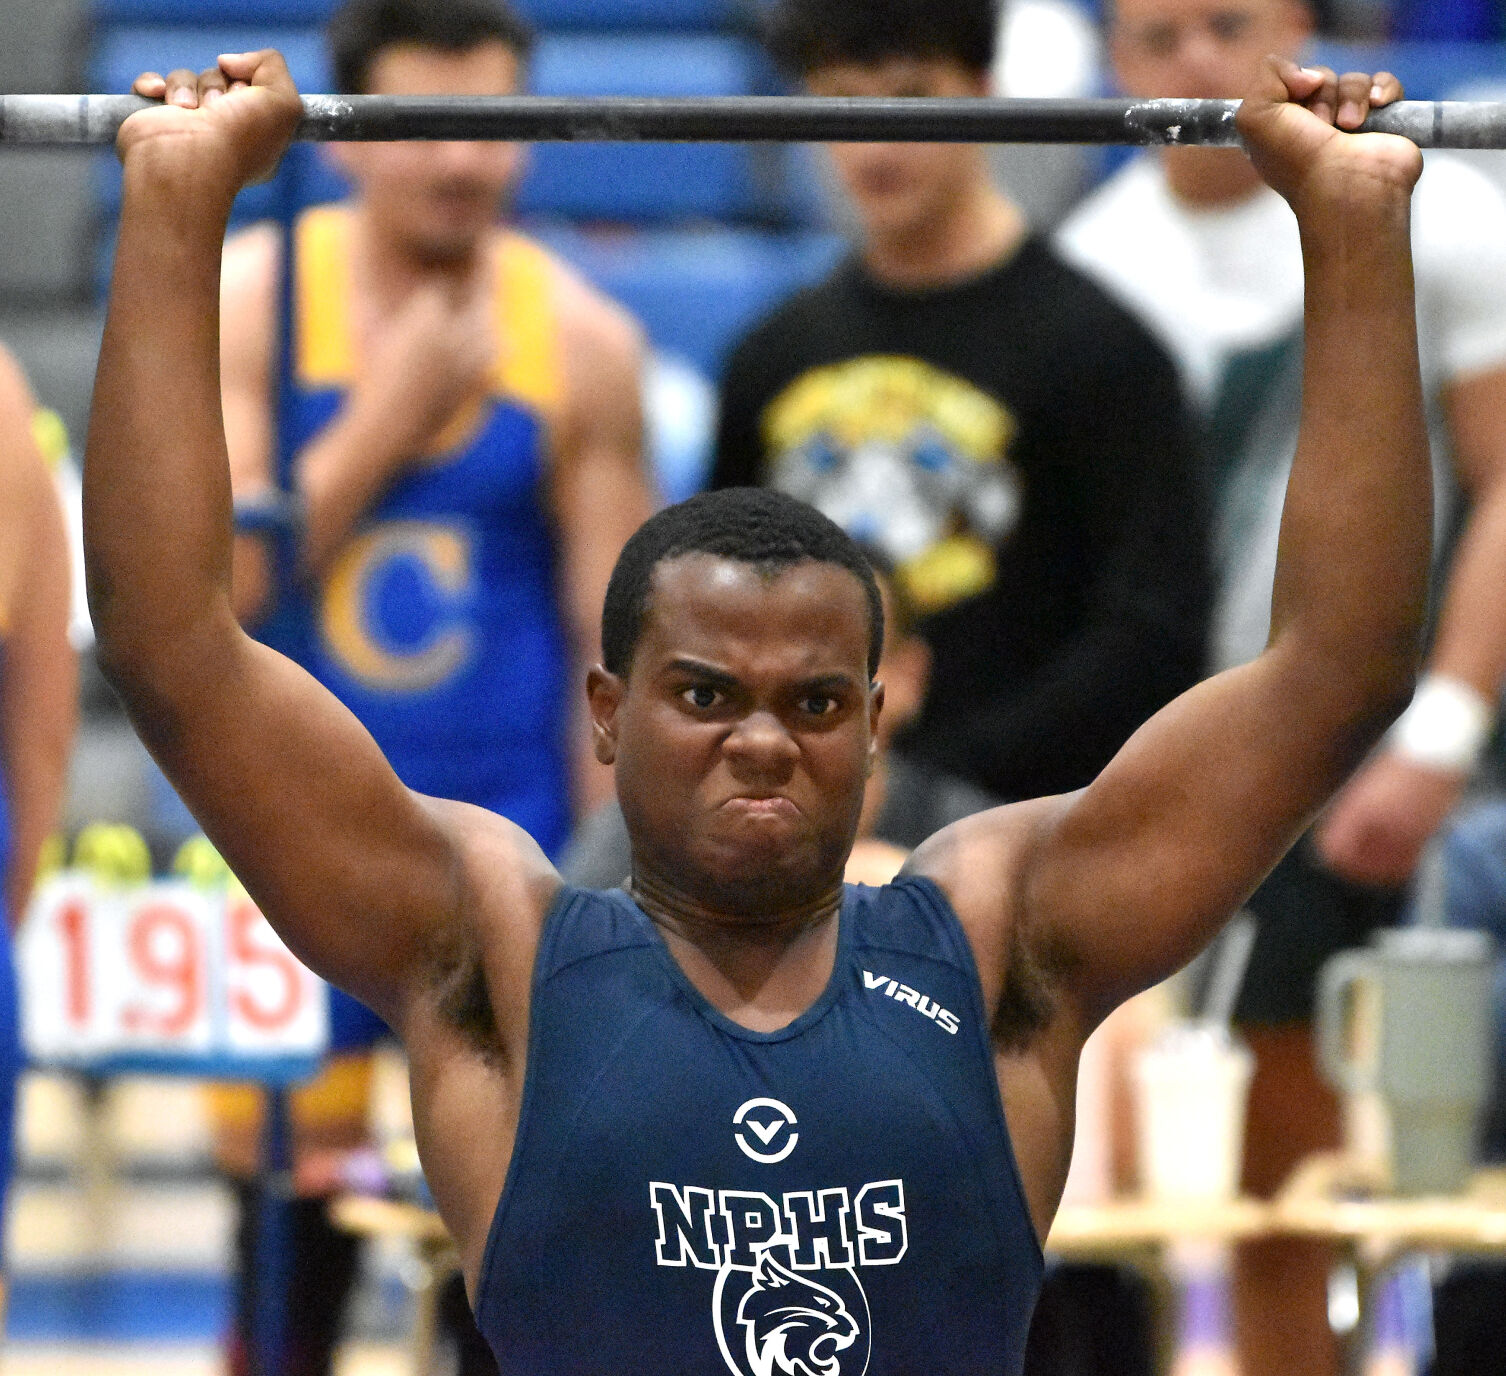 WEIGHTLIFTING: Local teams duke it out at Districts